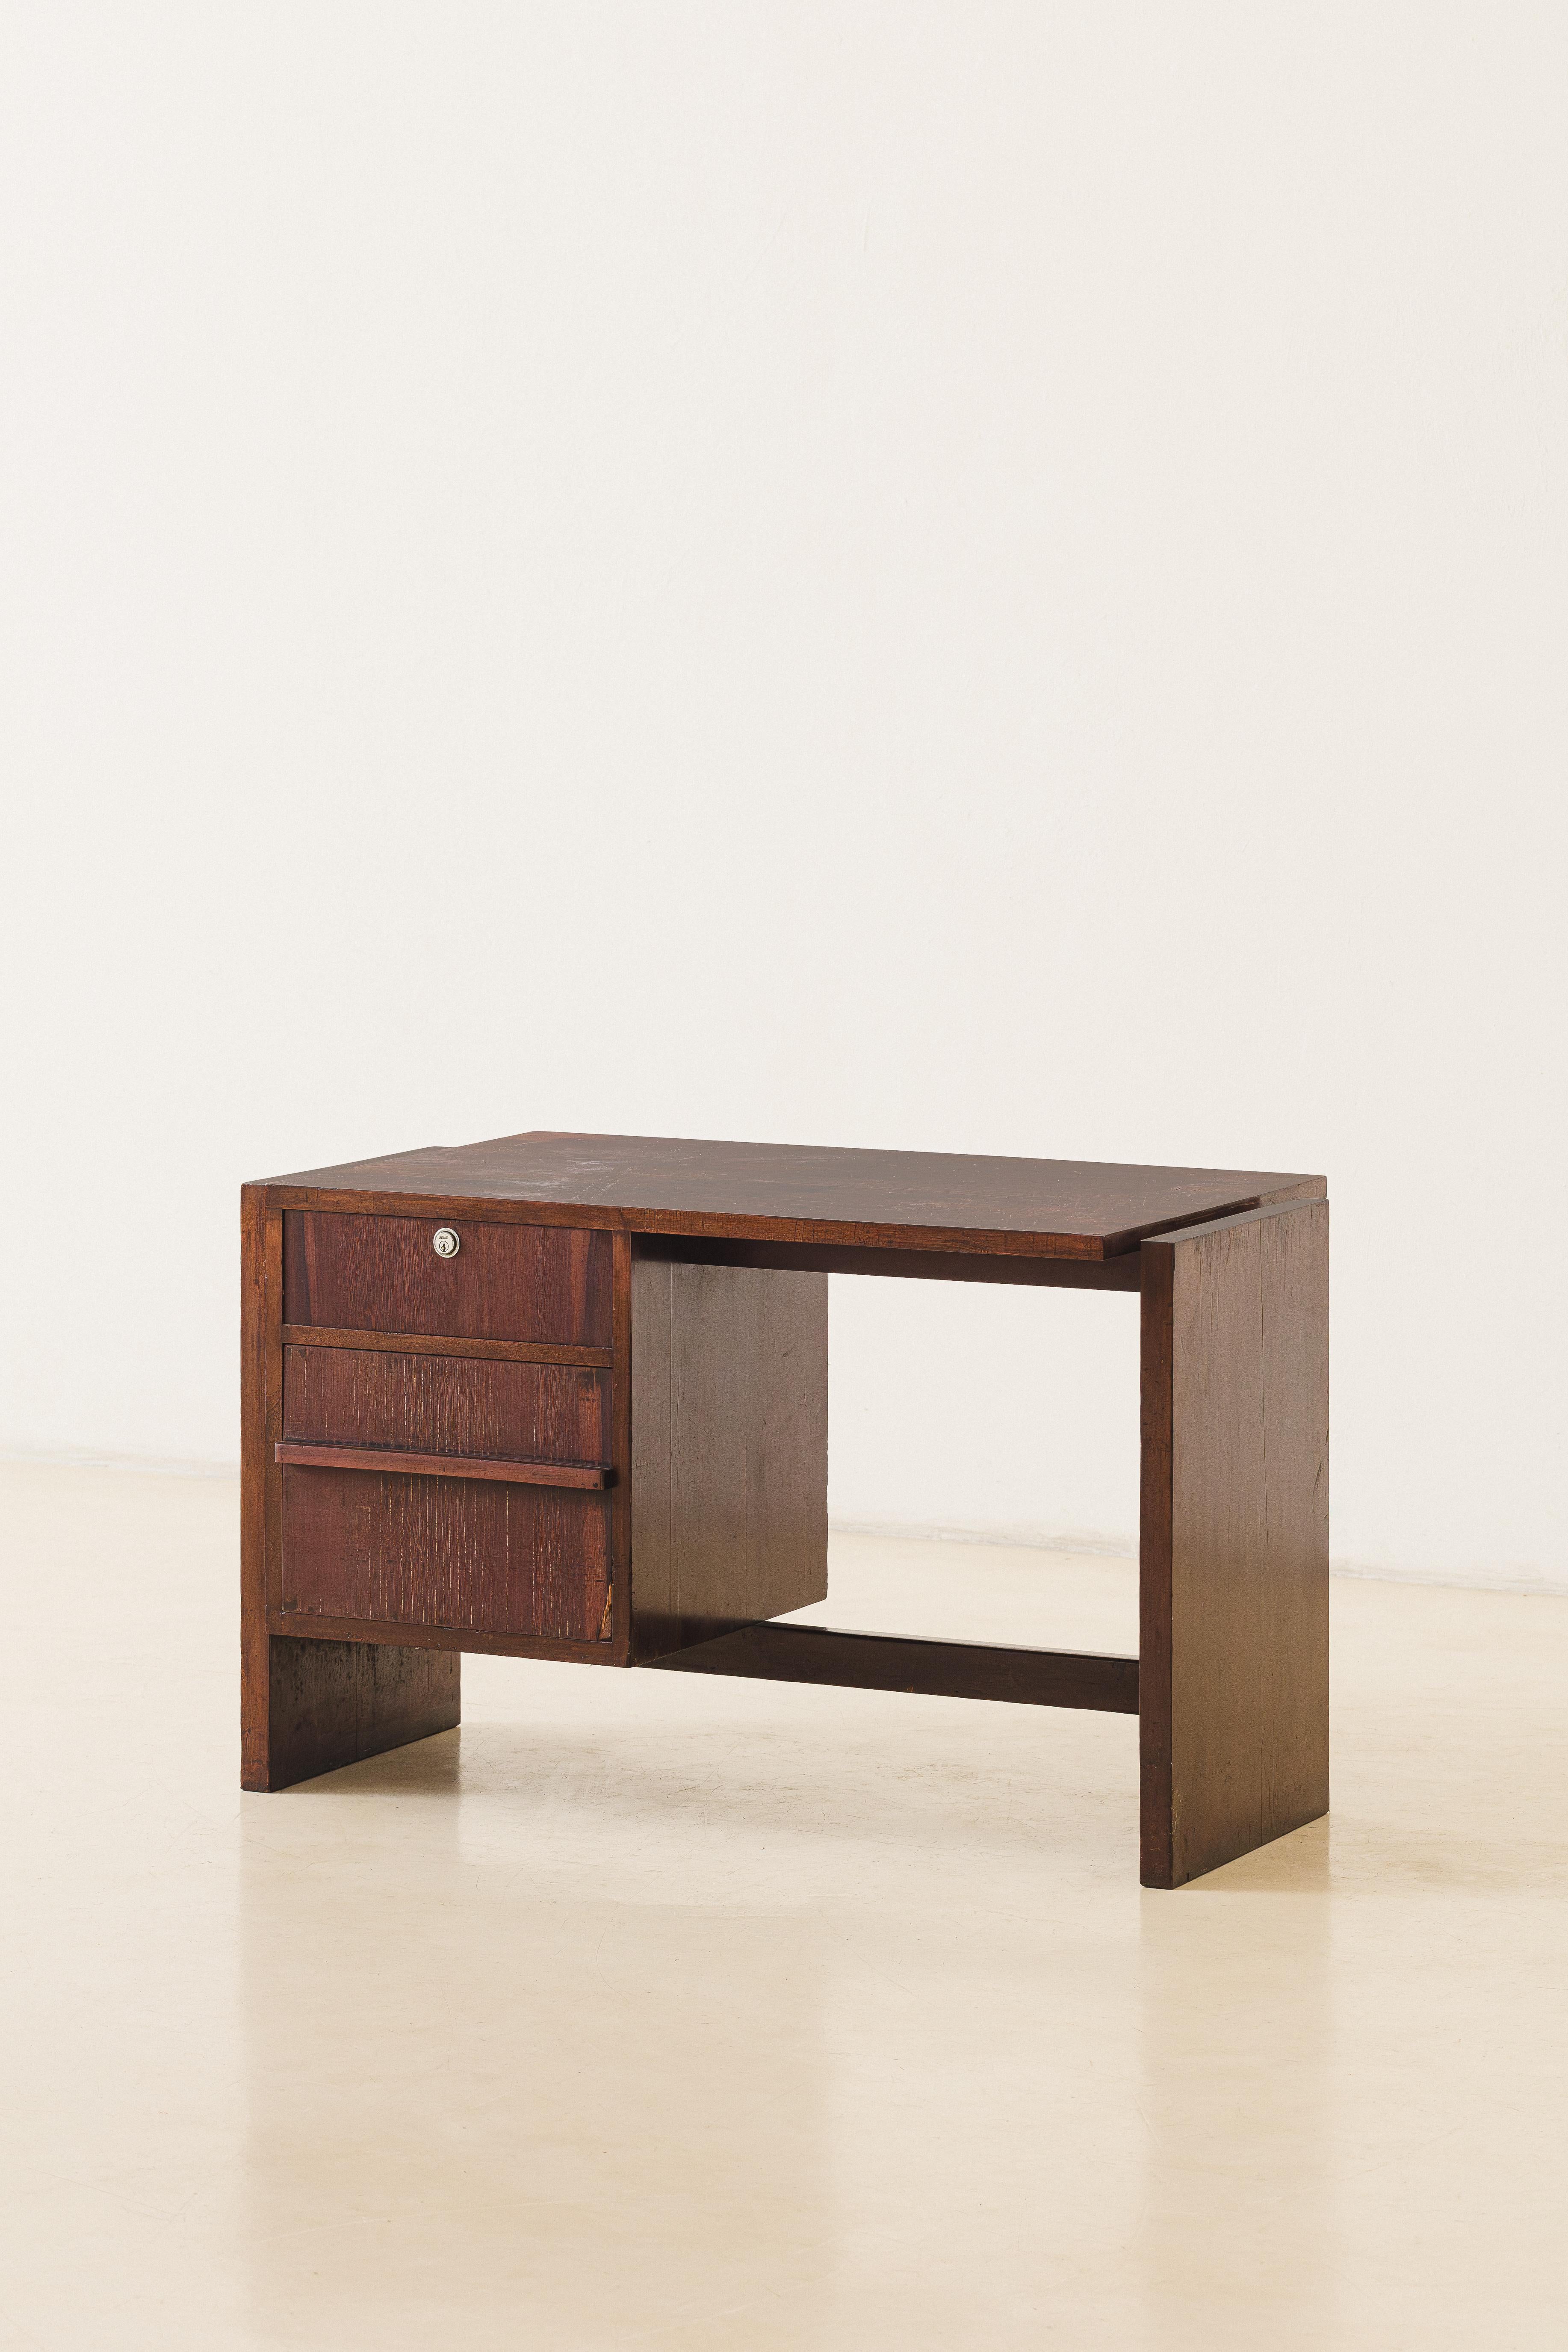 Rosewood Desk Brazilian Midcentury Design by Joaquim Tenreiro, 1960s  In Good Condition For Sale In New York, NY